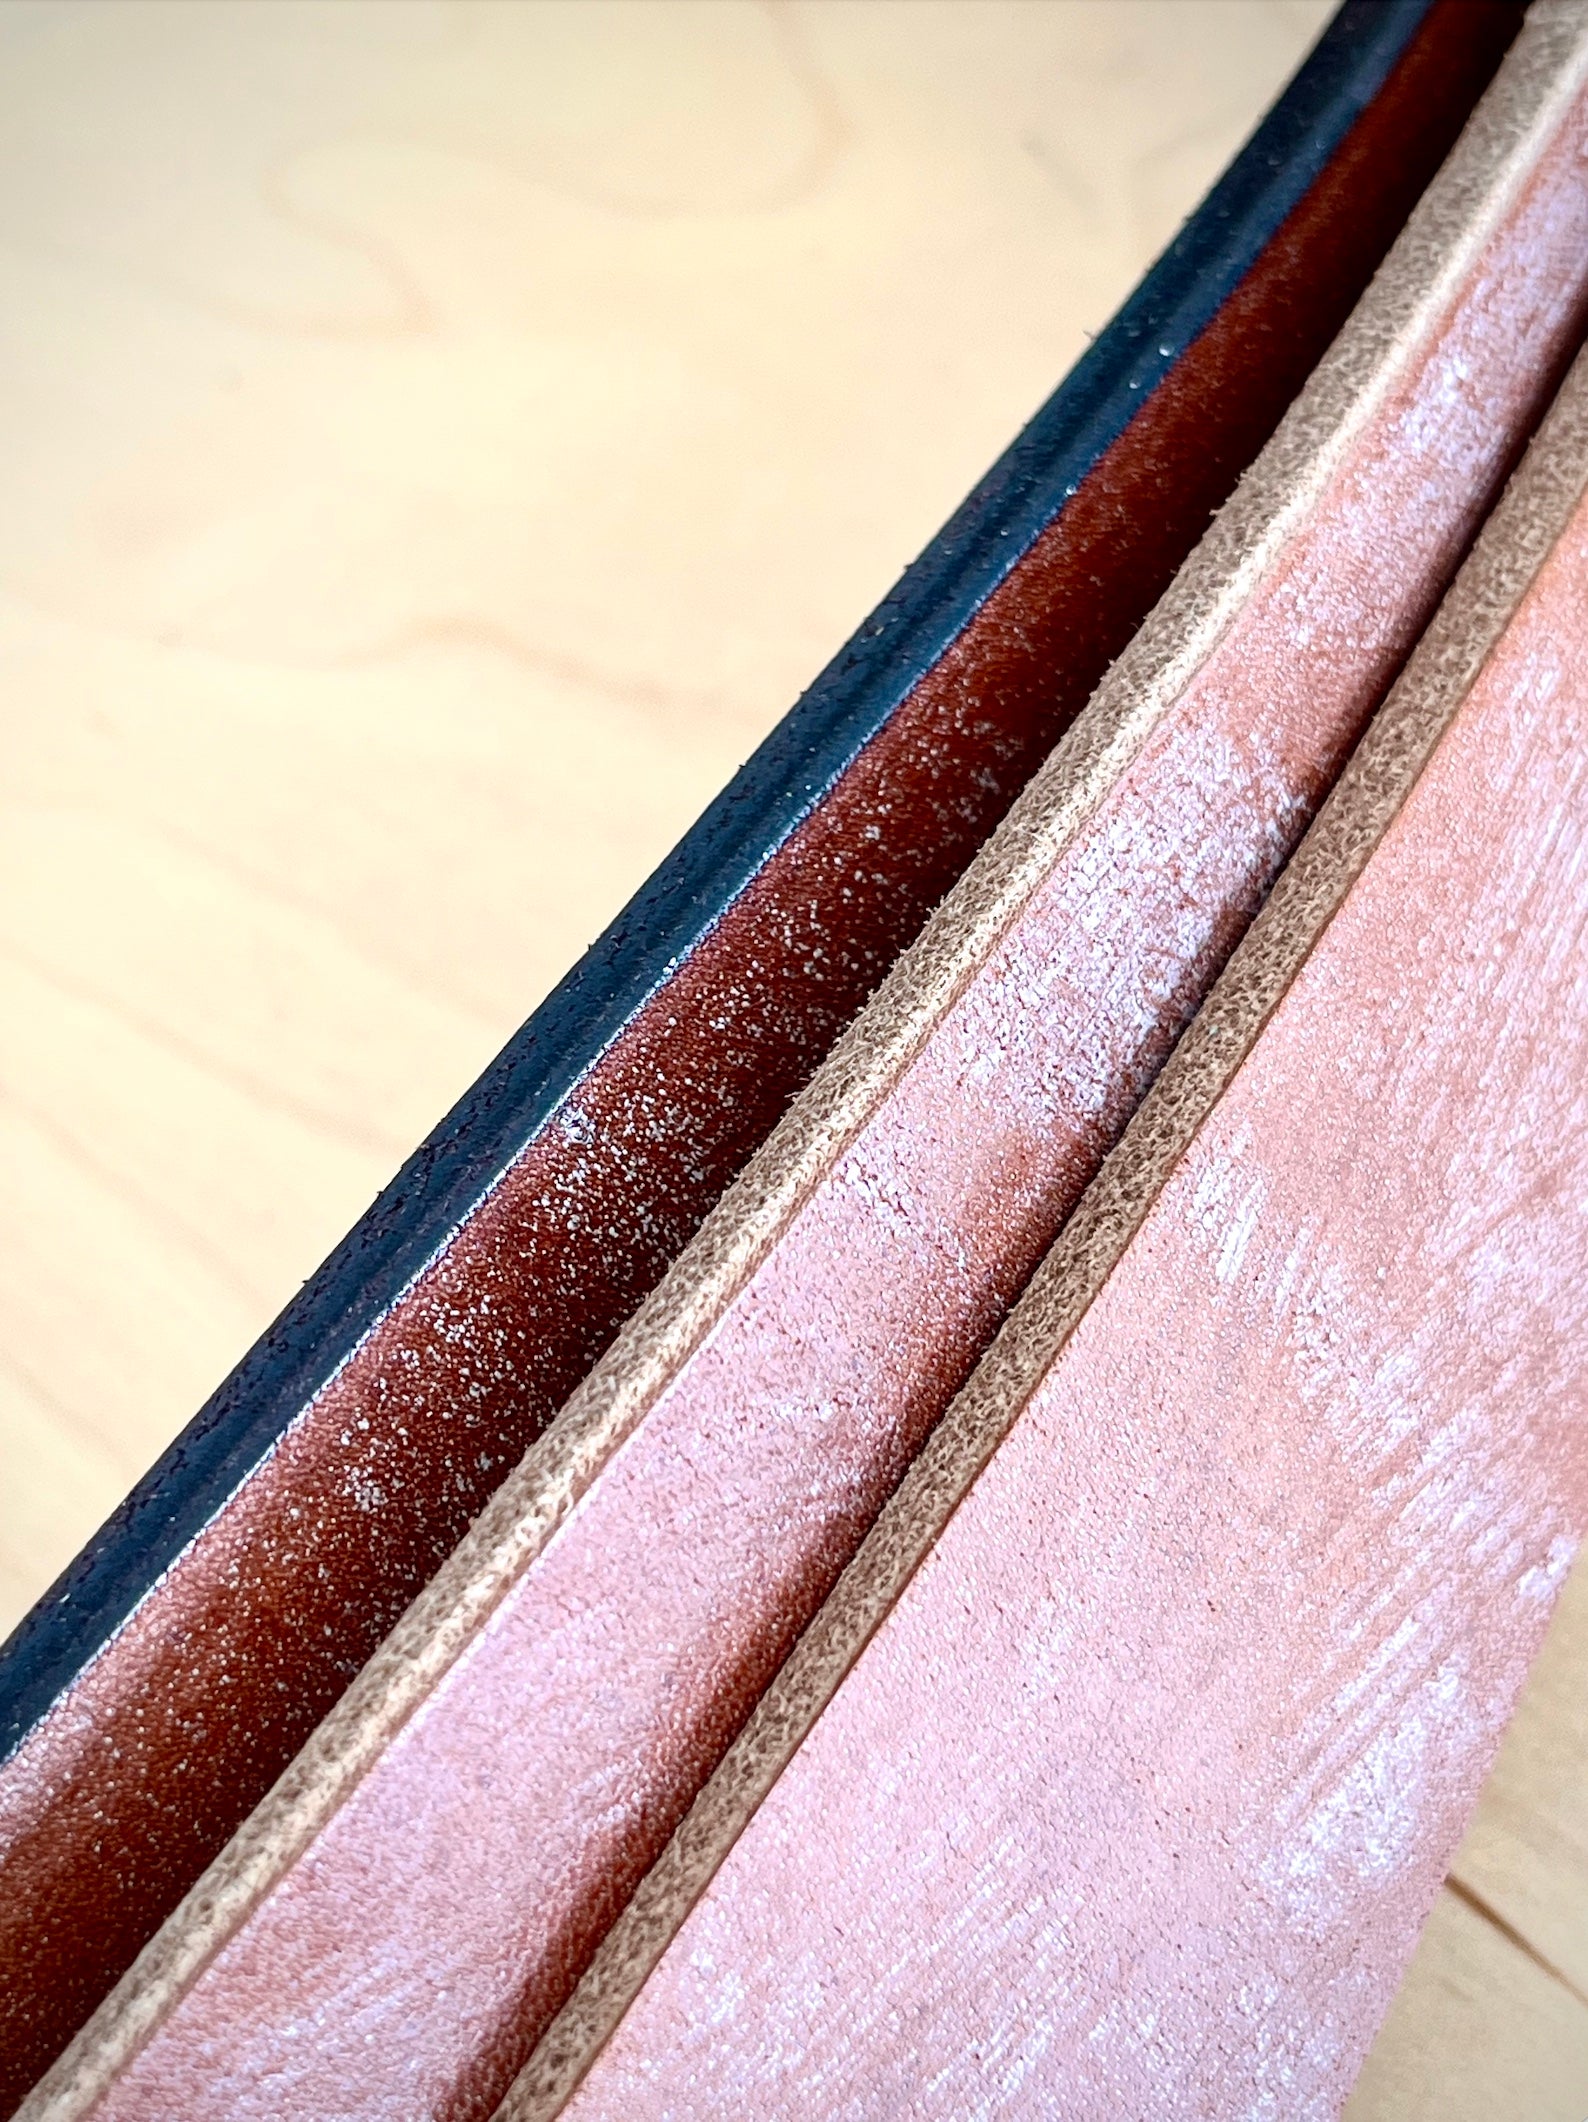 Smoothing Leather Edges and Back Using Gum Tragacanth 